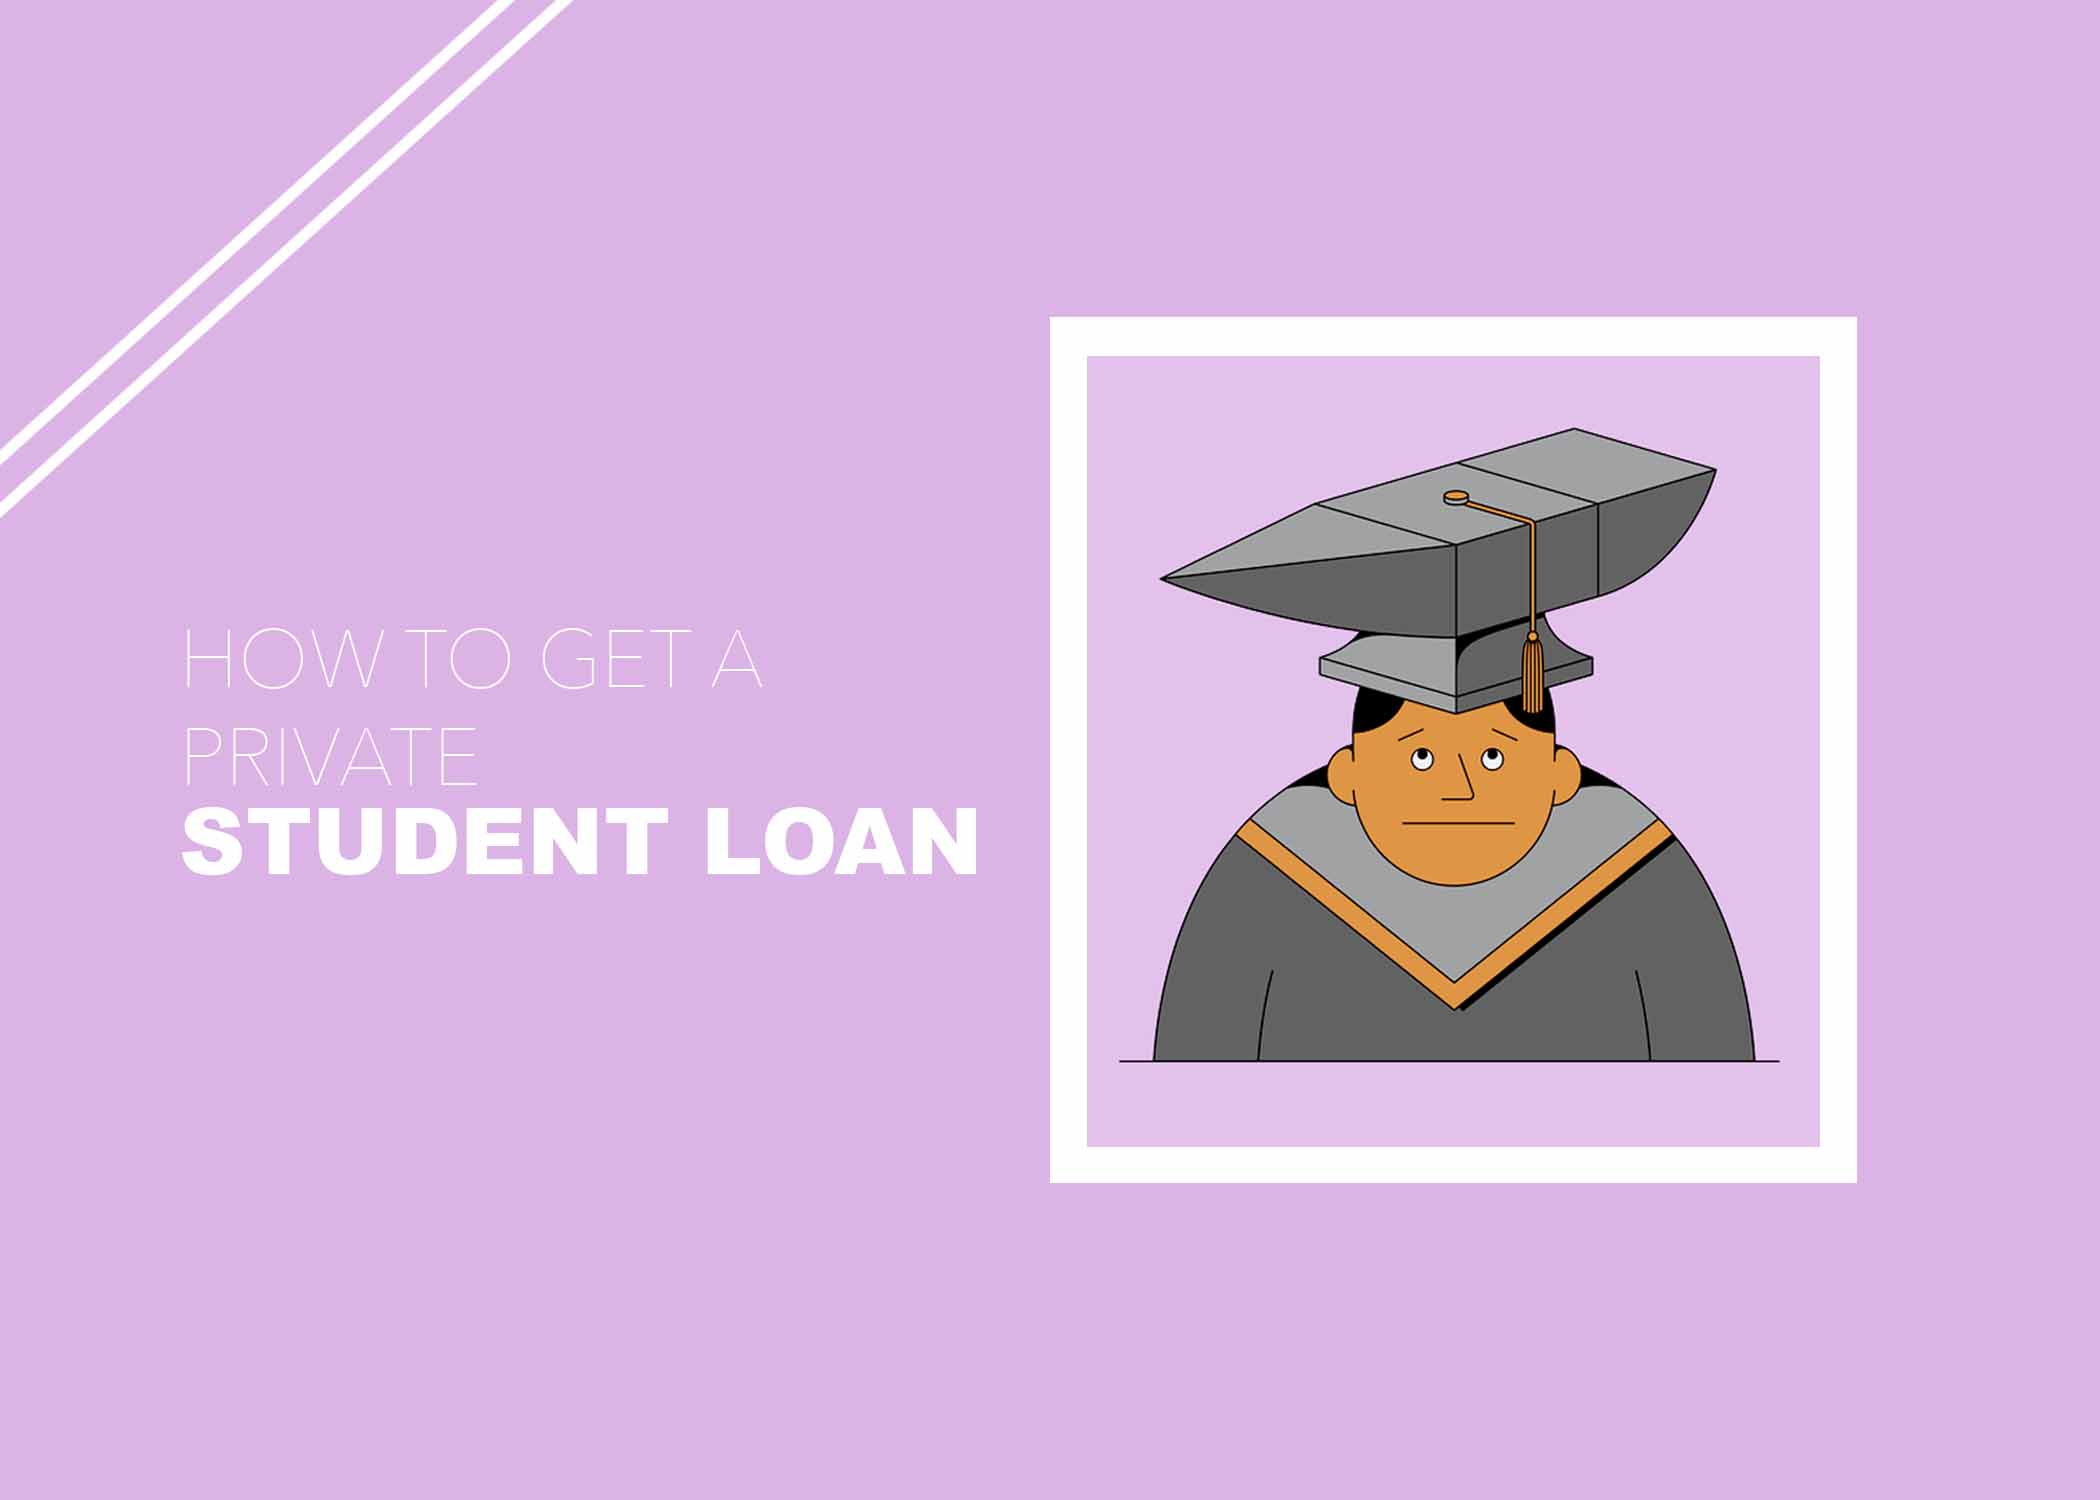 How to Get a Private Student Loan